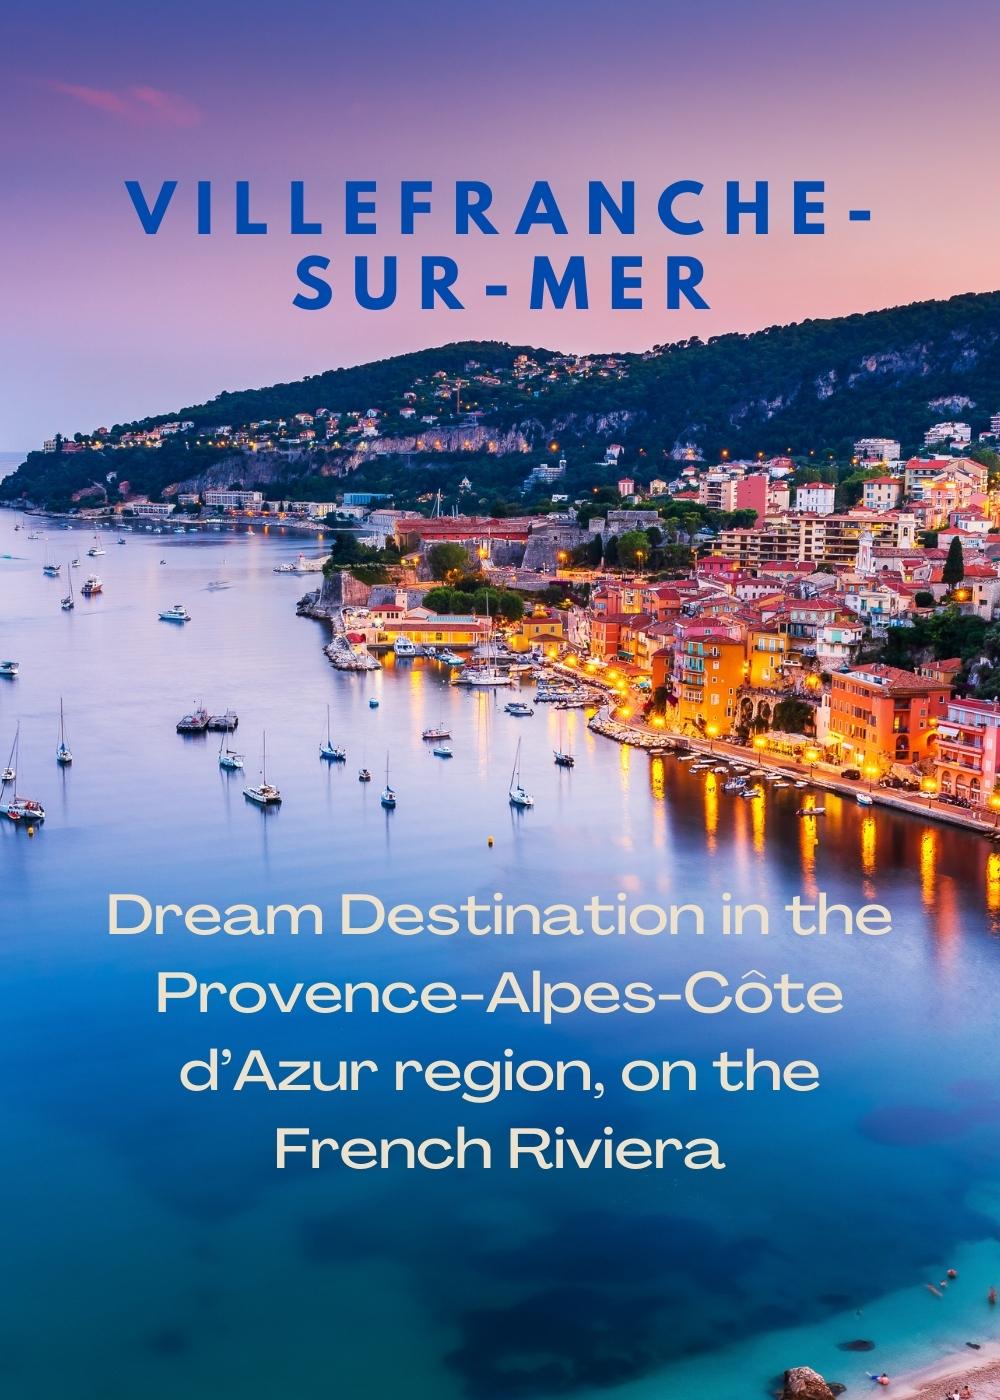 Villefranche Sur Mer Dream Destination to travel to in the French Riviera